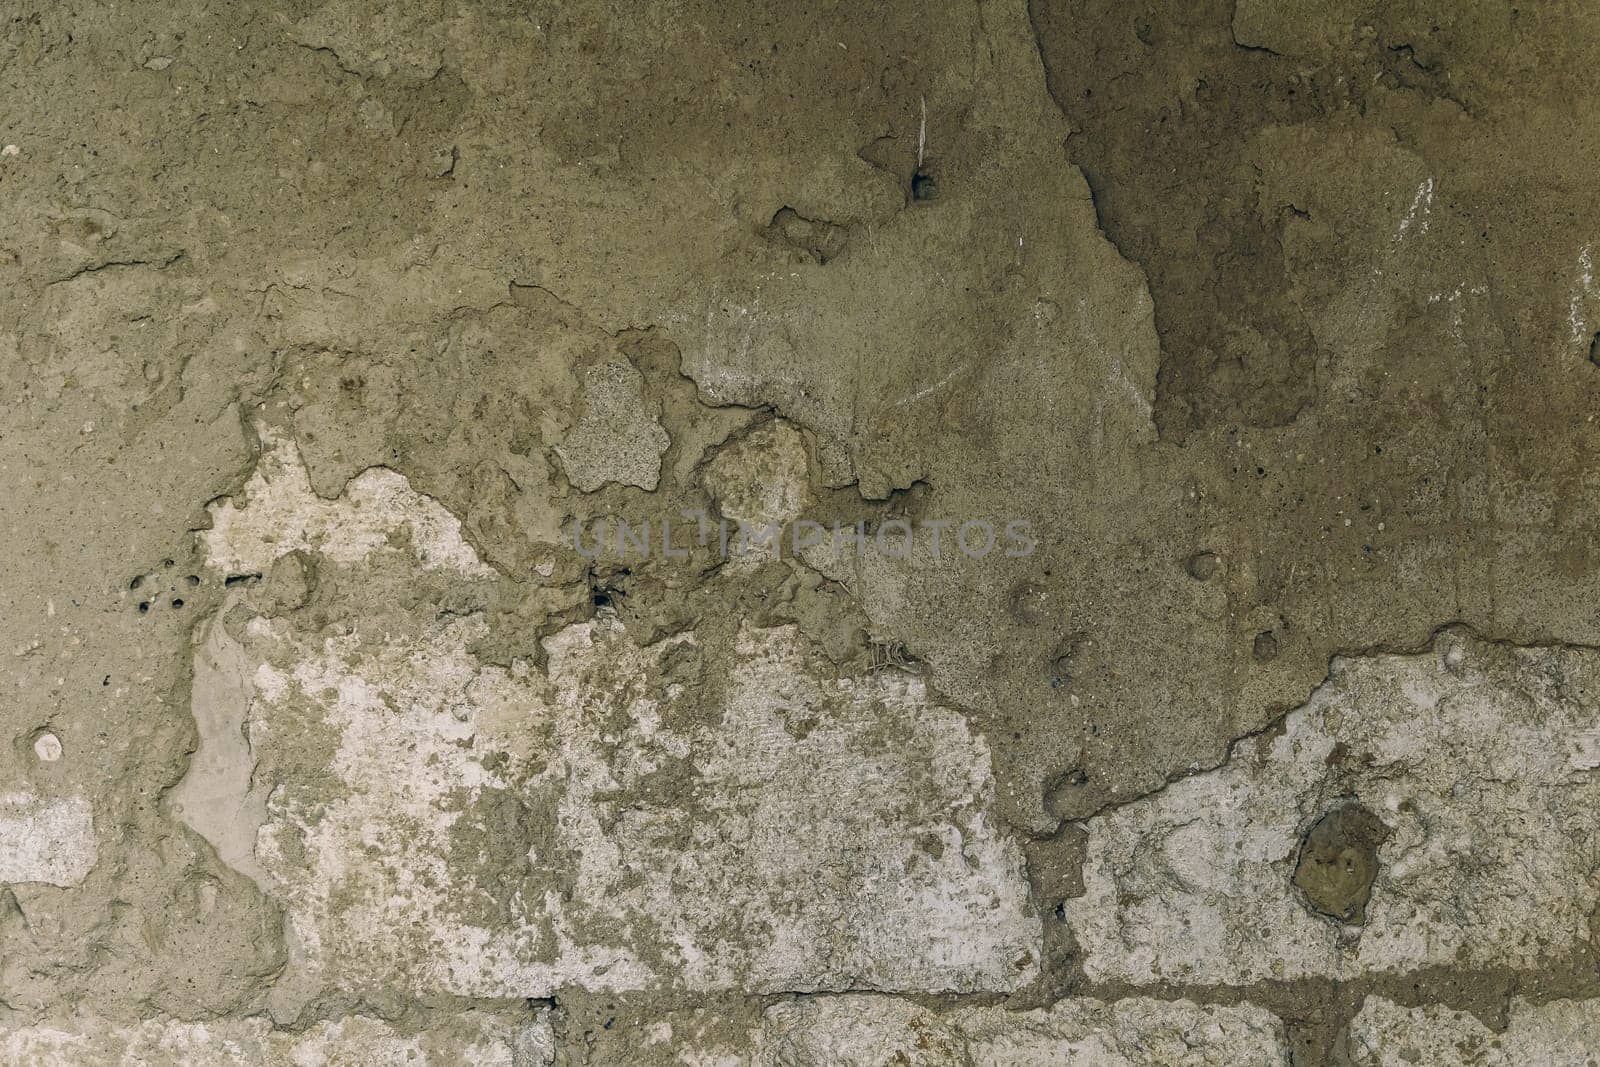 A wall with a rough, textured surface. The wall appears to be made of concrete and has a somewhat dirty, worn appearance